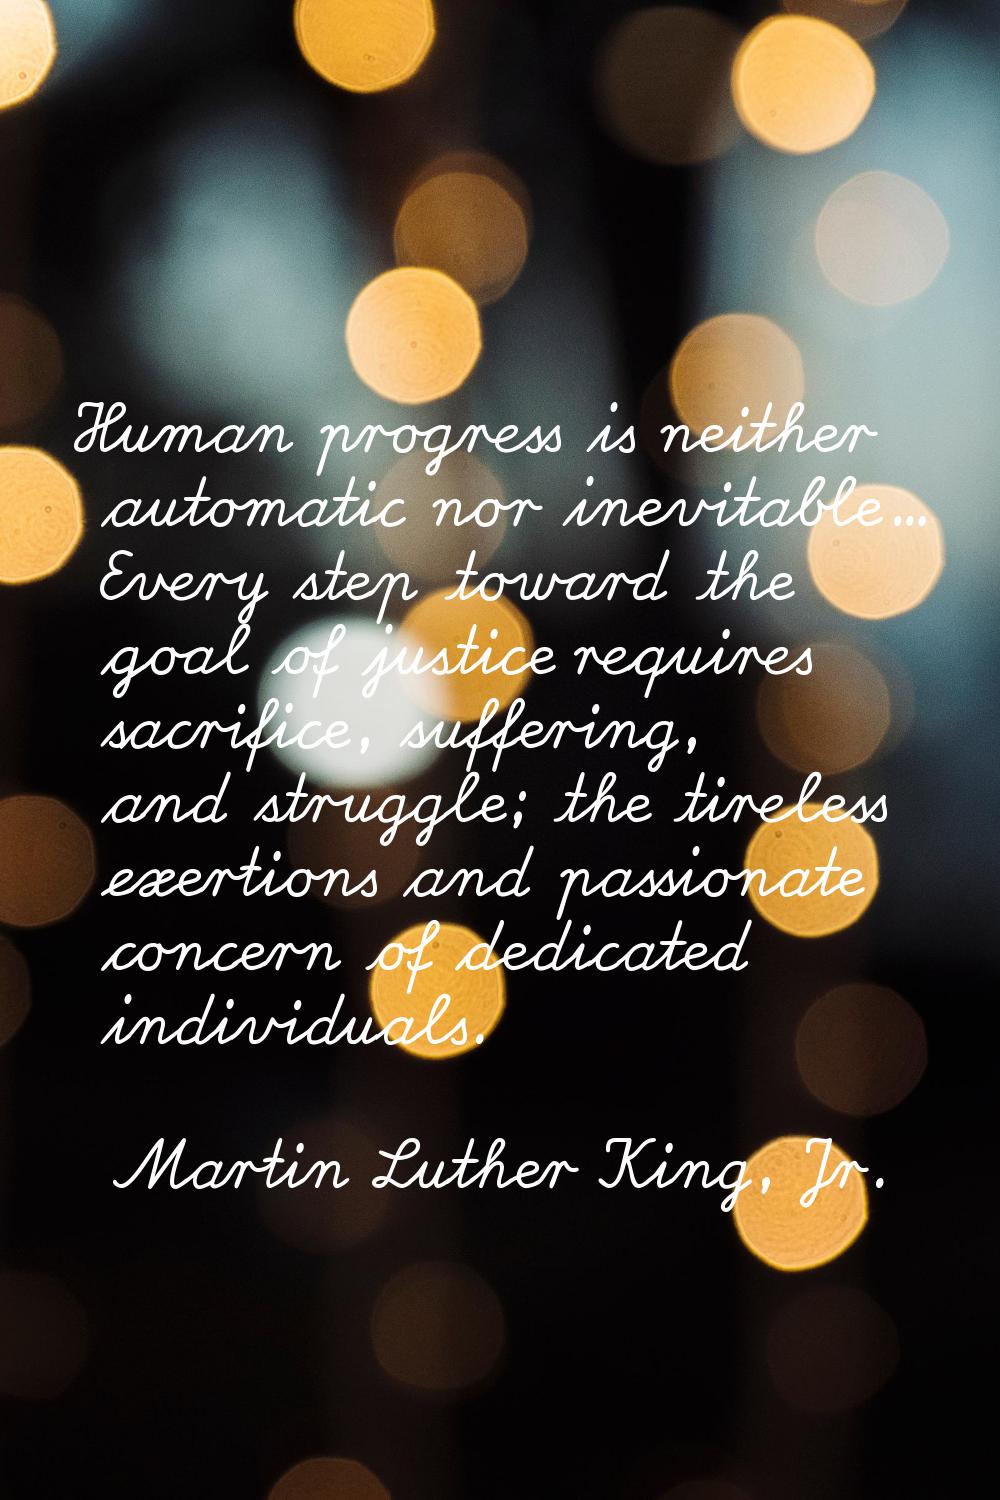 Human progress is neither automatic nor inevitable... Every step toward the goal of justice require